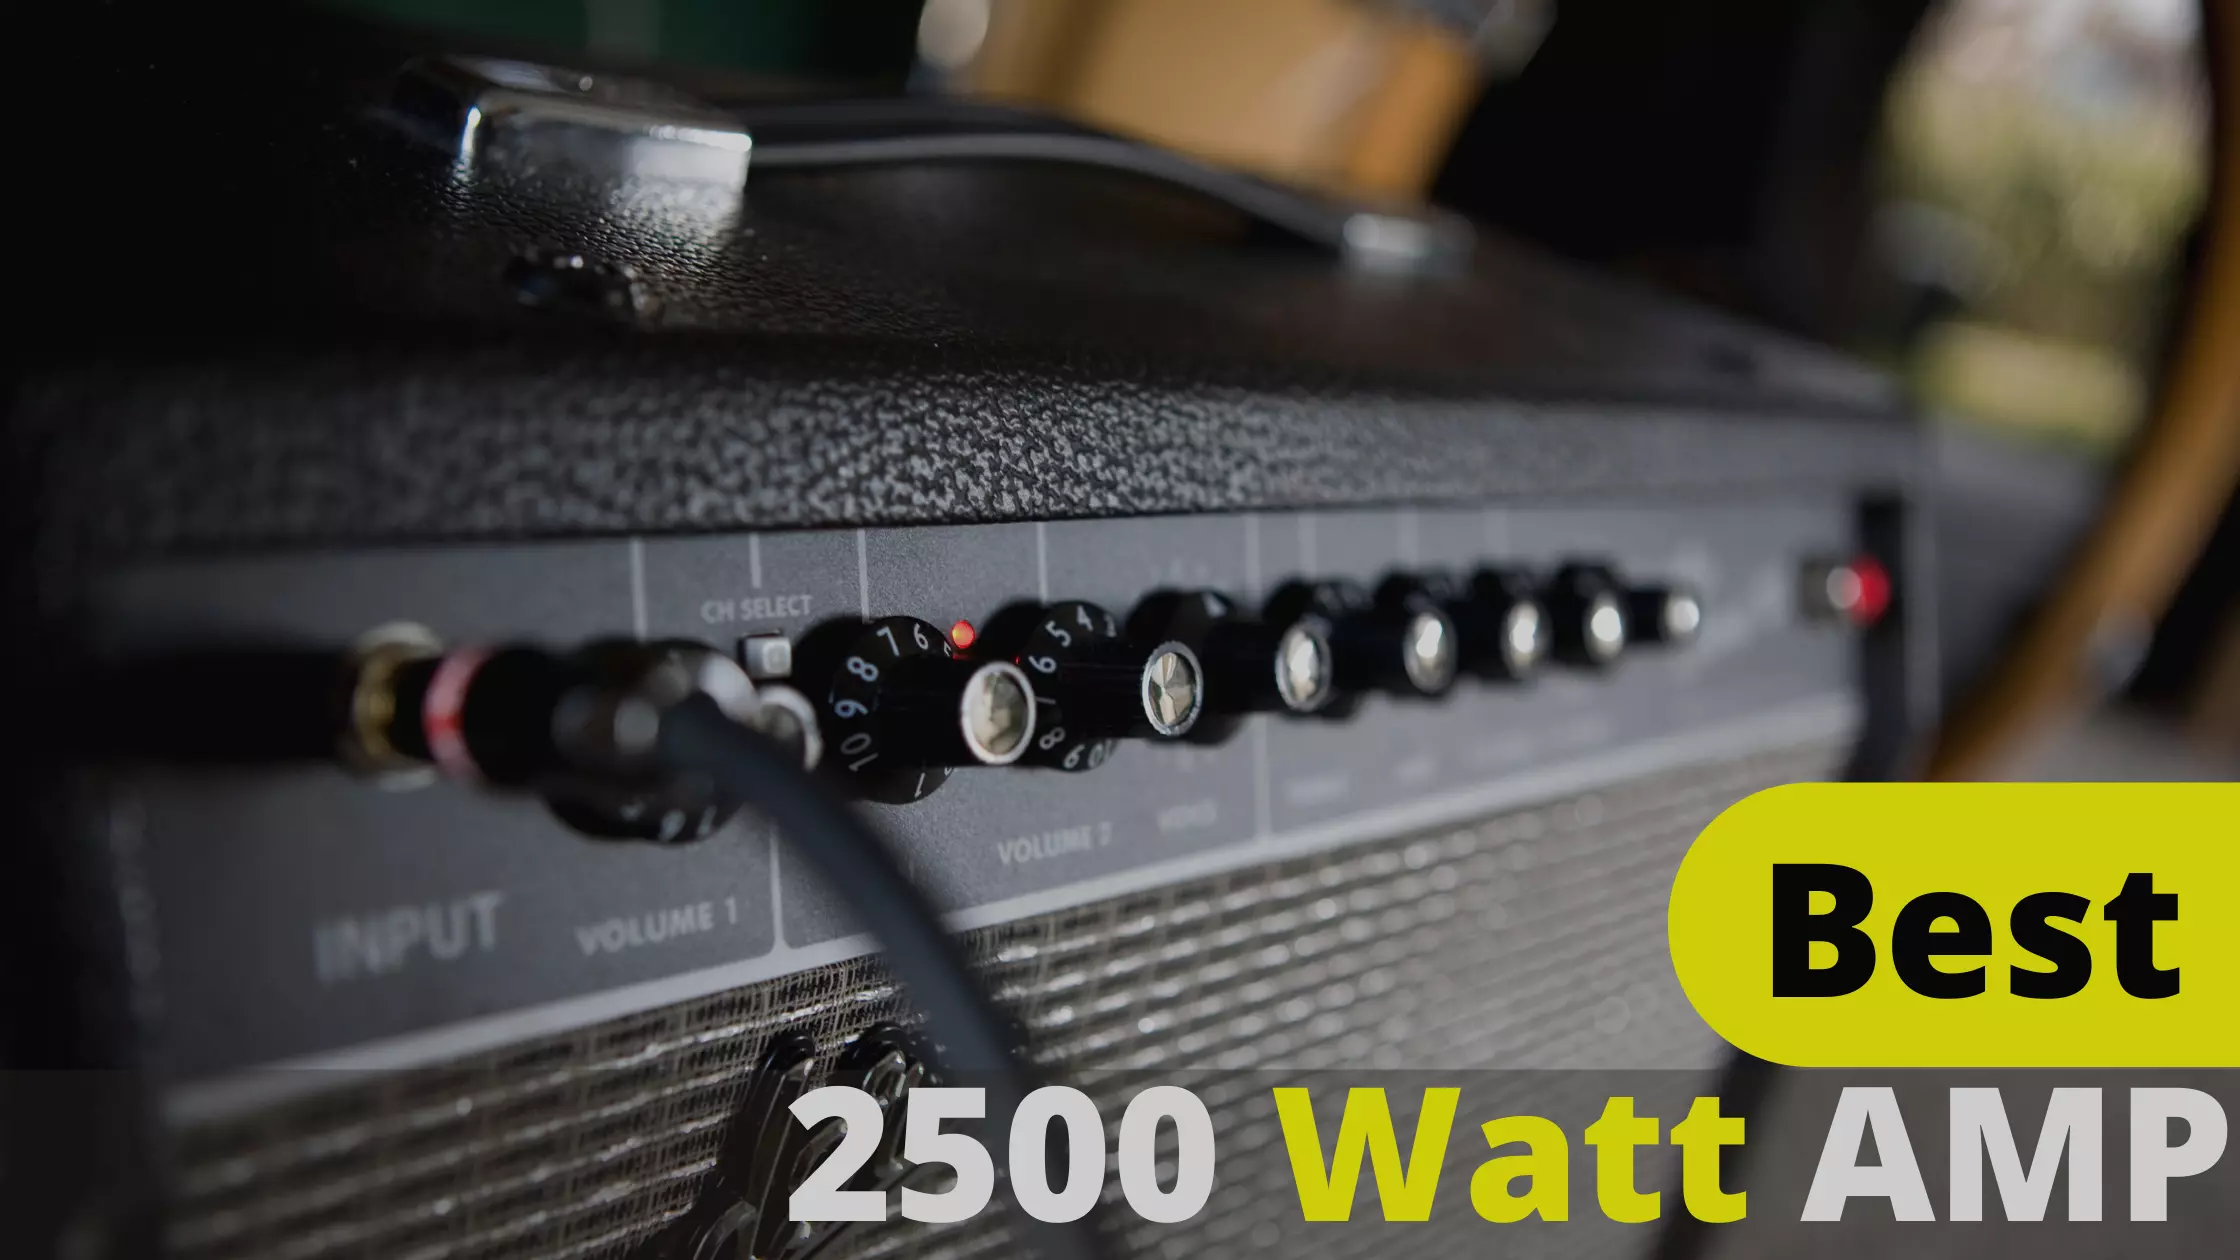 Top 12 Best 2500 Watt Amp Reviews and Buying Guide 2022